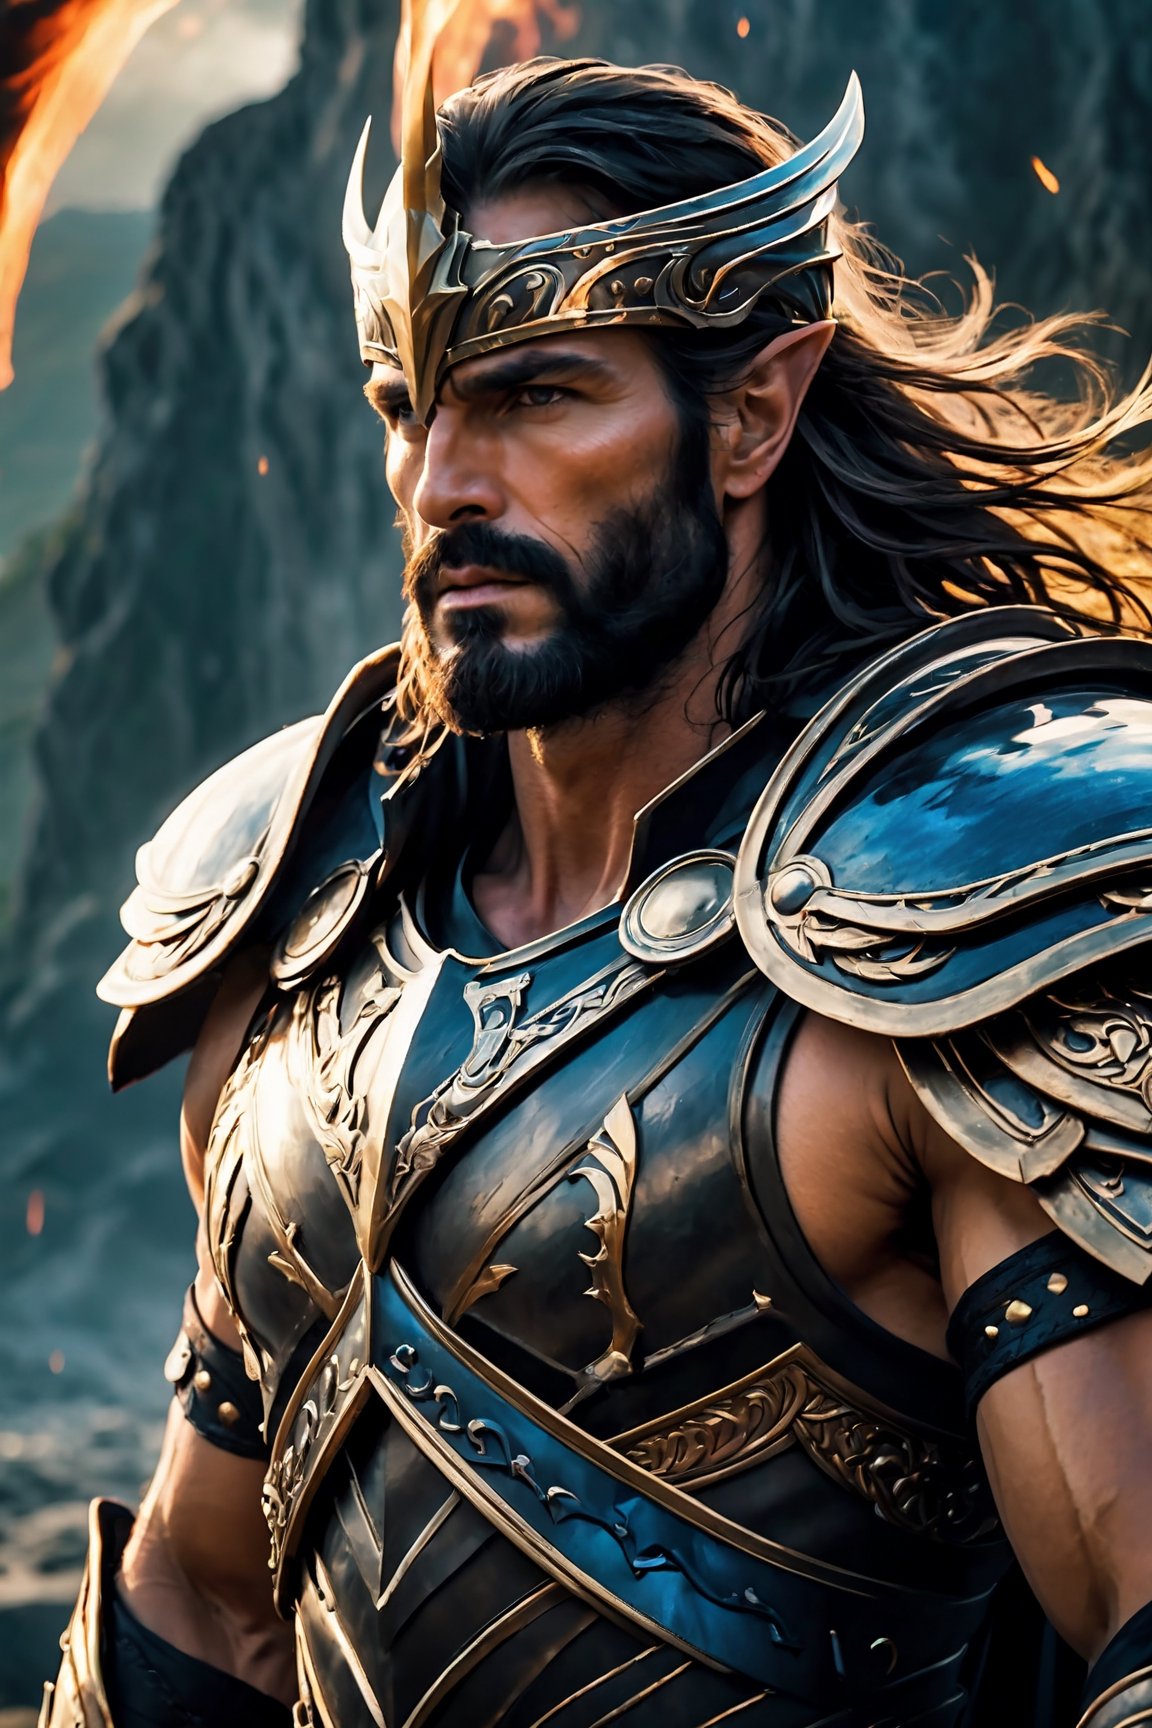 (8k HDR), (masterpiece, best quality), ((dark fantasy)),

Portrait: Thadeus in Regal Armor:

"Generate a close-up portrait of Thadeus, the God of Thunder and the Underworld, wearing regal armor that blends elements of Thor's iconic attire with the dark, imposing aesthetic of Hades. His expression is solemn yet commanding, reflecting his dual role as ruler of both realms."

dark and vibrant, (micheal bay cinematic shots), depth of field, cinematic scenery, 2D